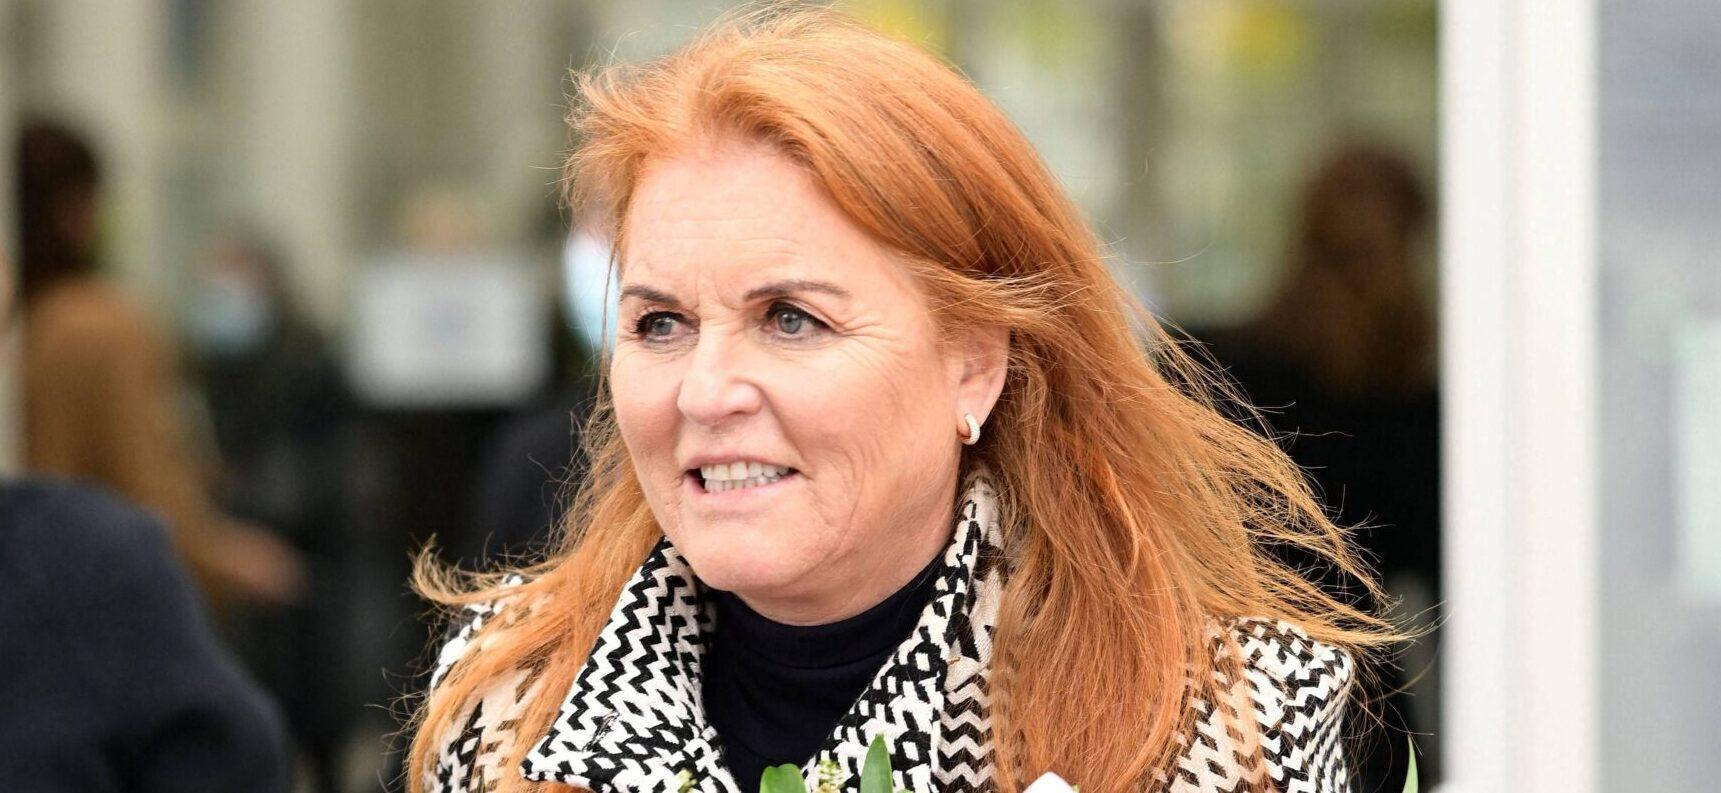 Sarah Ferguson Returns To Podcast After Cancer Scare, Recalls Almost Missing Appointment